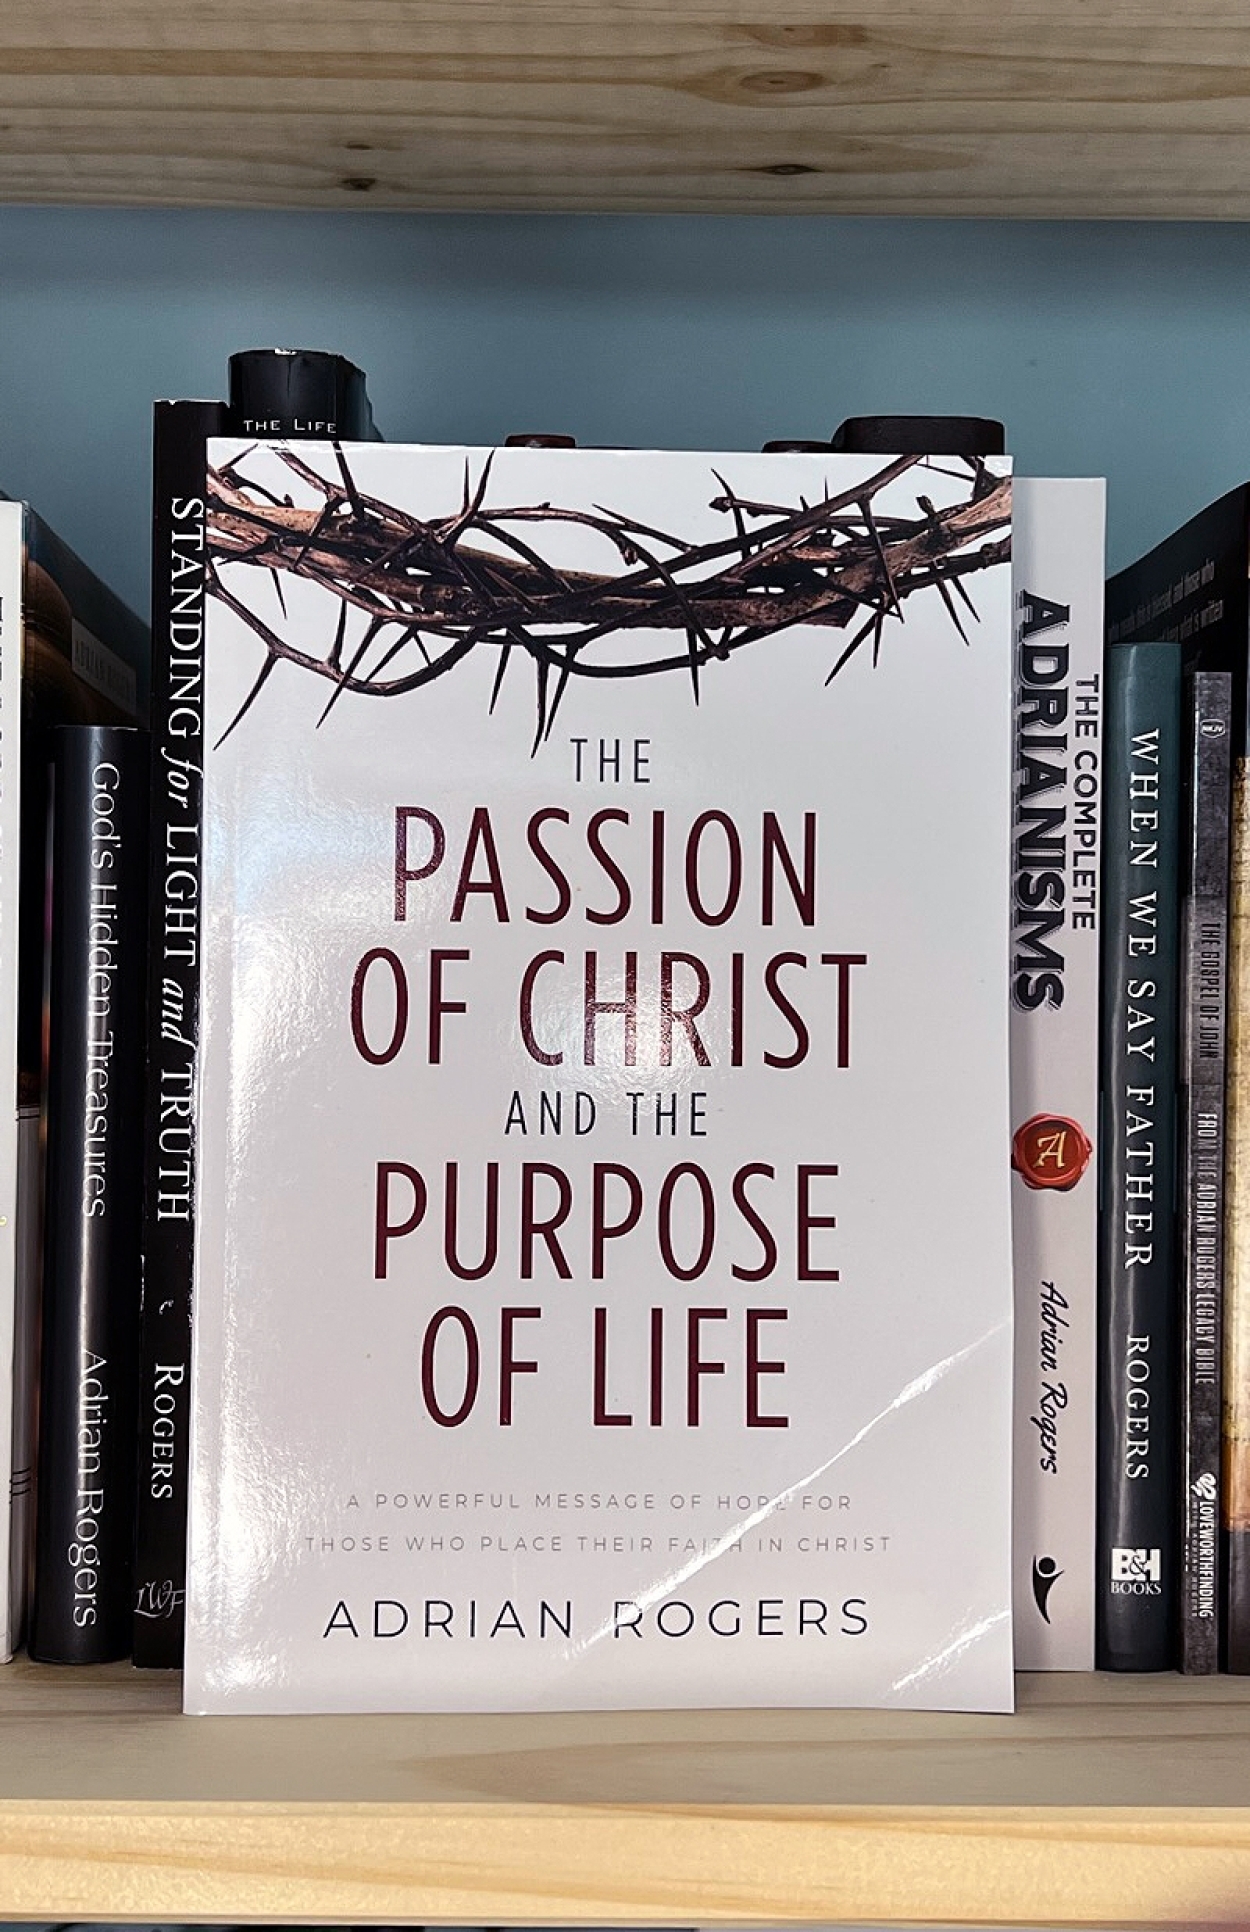 B114 the passion of christ and the purpose of life book BOOKSHELF